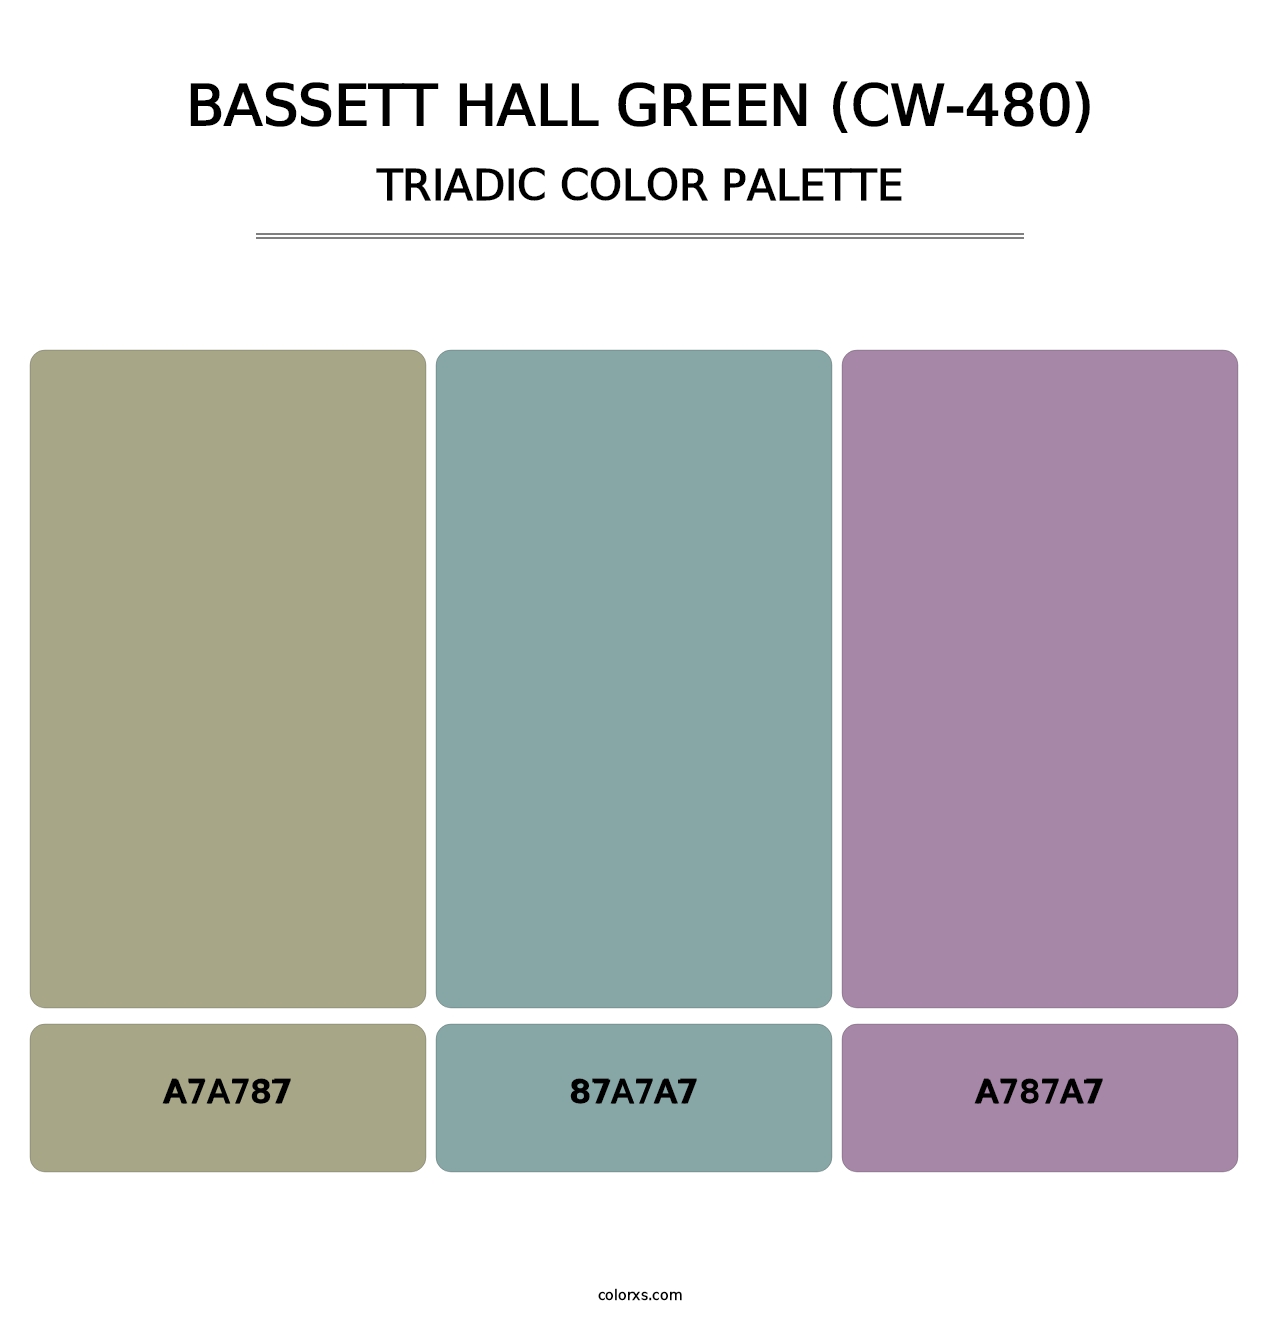 Bassett Hall Green (CW-480) - Triadic Color Palette